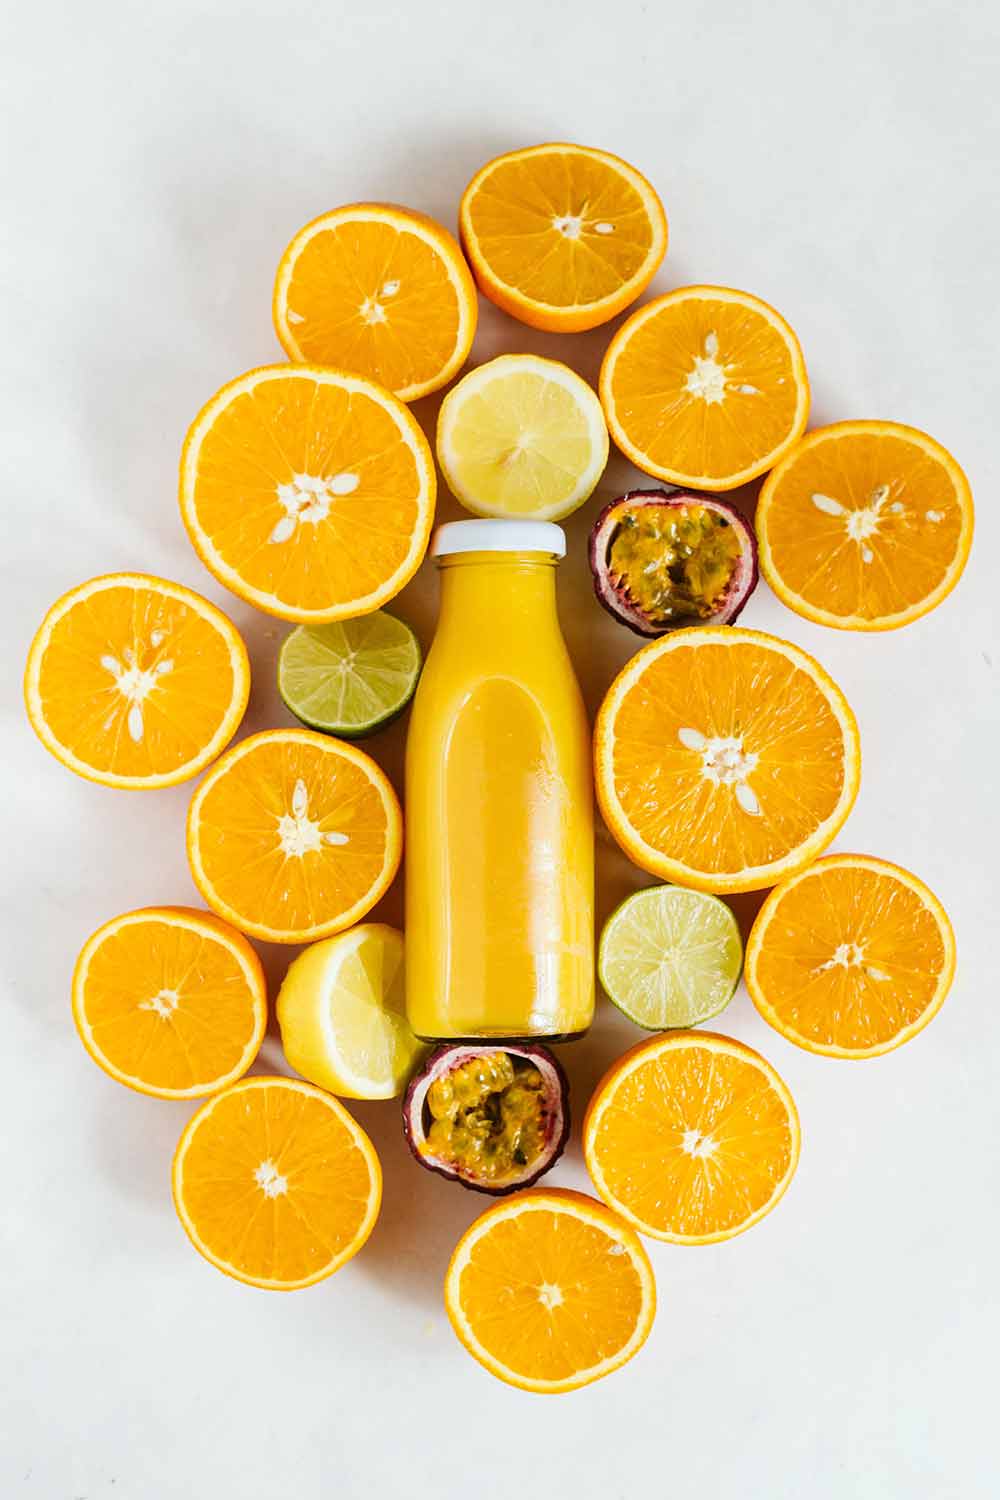 Glass jar full of orange juice surrounded by half cut oranges, lemons and limes on a white background.